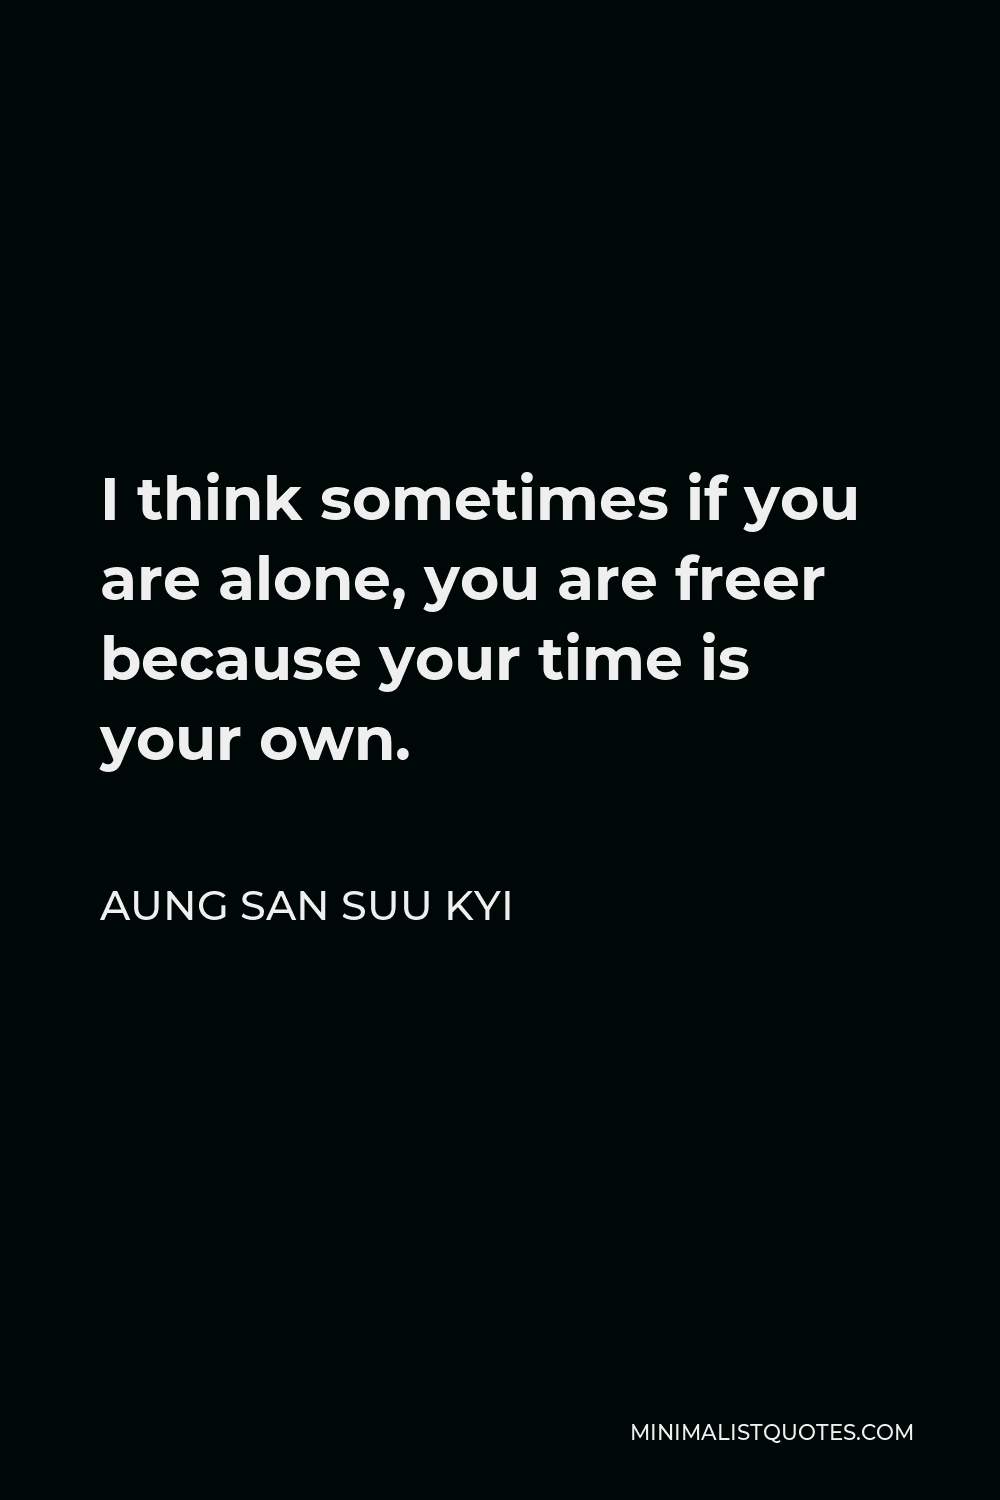 Aung San Suu Kyi Quote - I think sometimes if you are alone, you are freer because your time is your own.